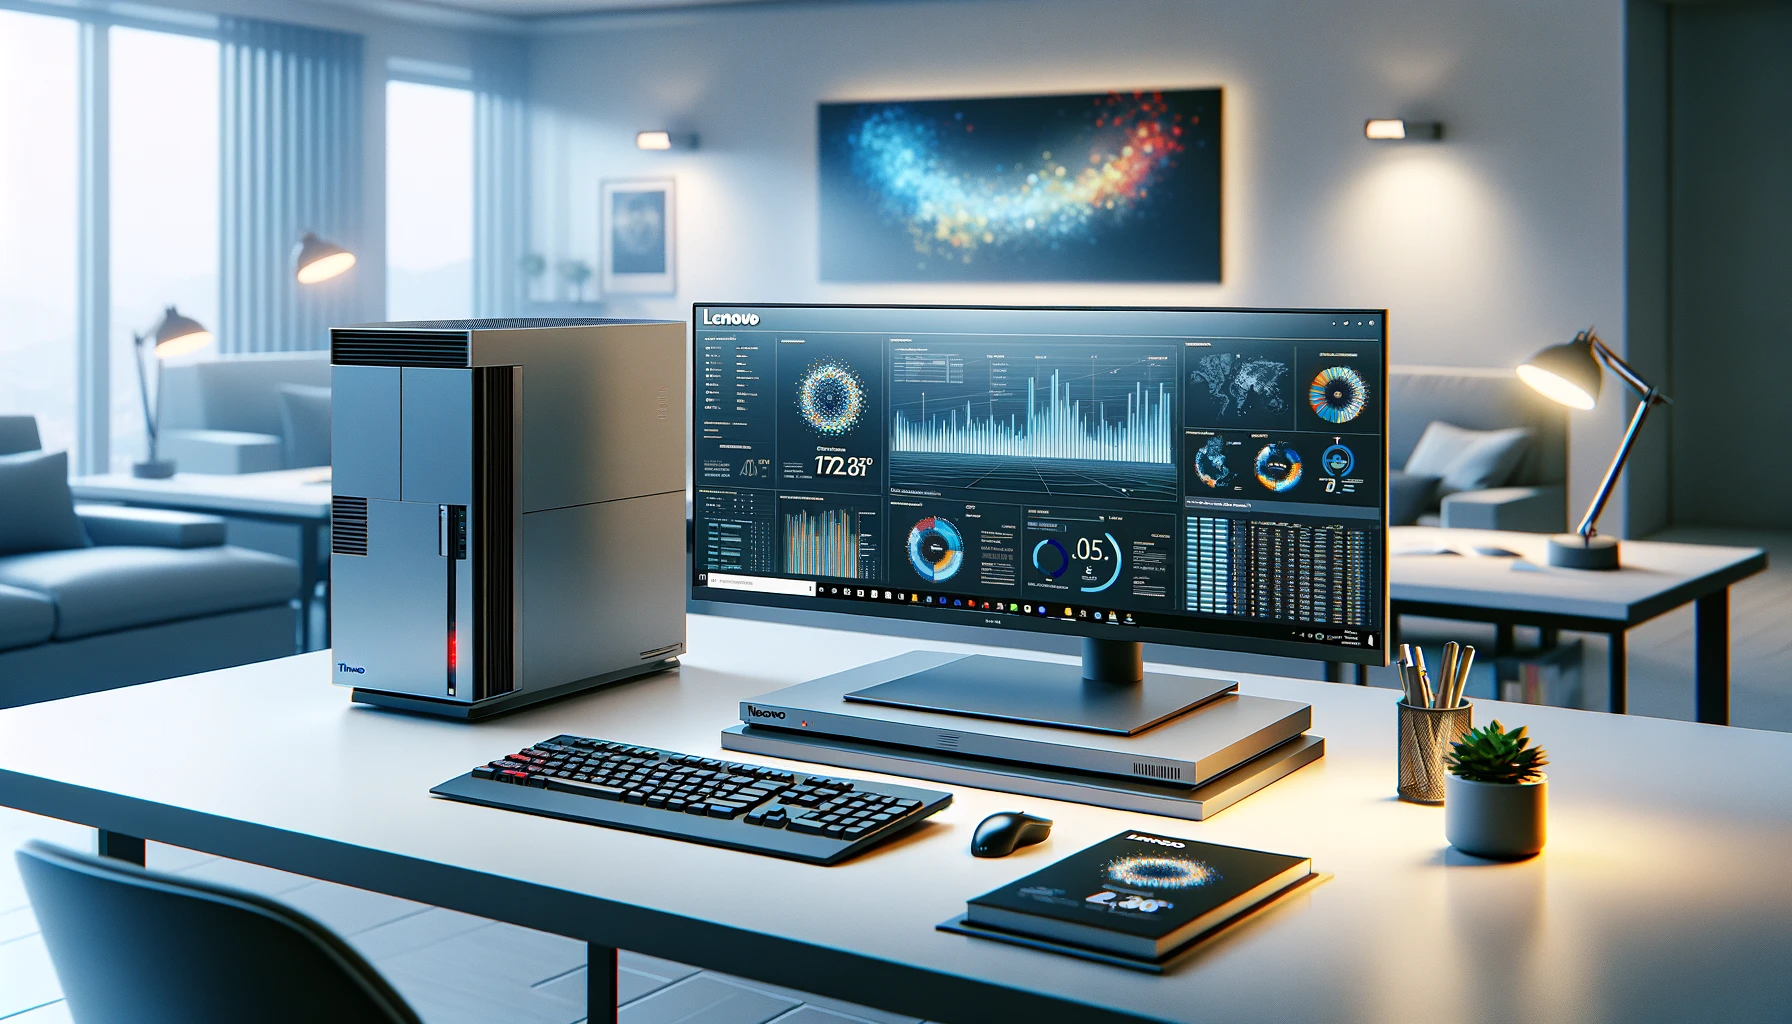 The image above depicts a 3D stock photo featuring a Lenovo ThinkCentre desktop setup in a corporate office environment, showcasing a professional and efficient workspace designed to emphasize reliability and productivity.